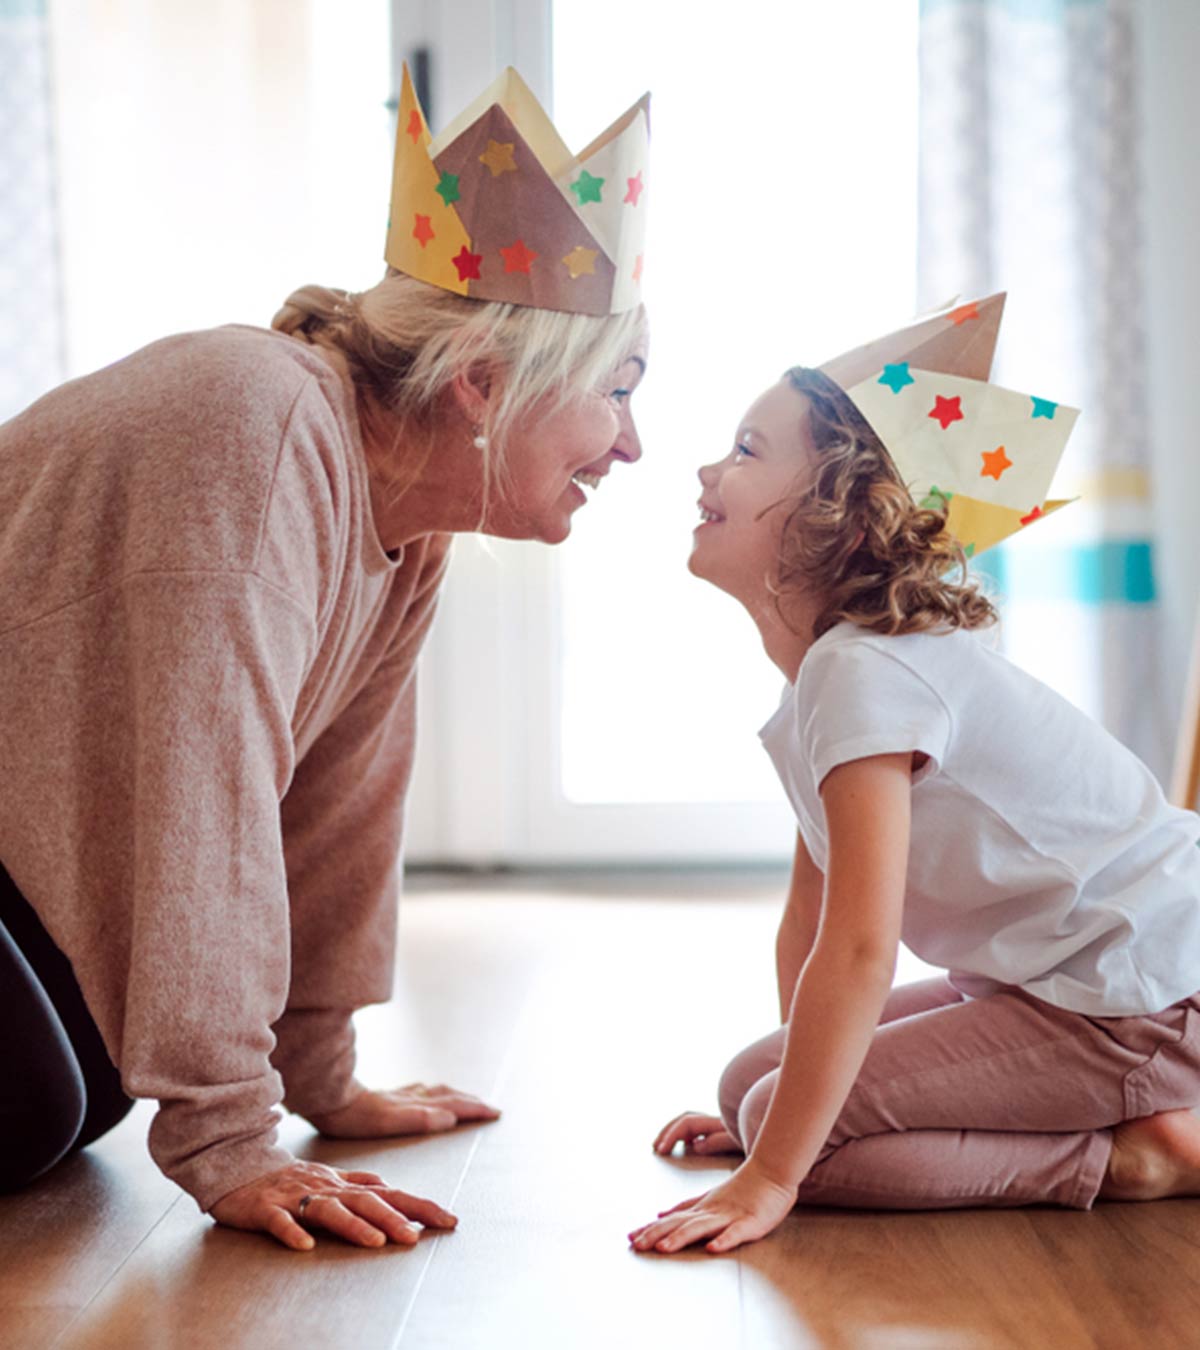 6 Life Skills I'd Want My Kids To Learn Early In Life